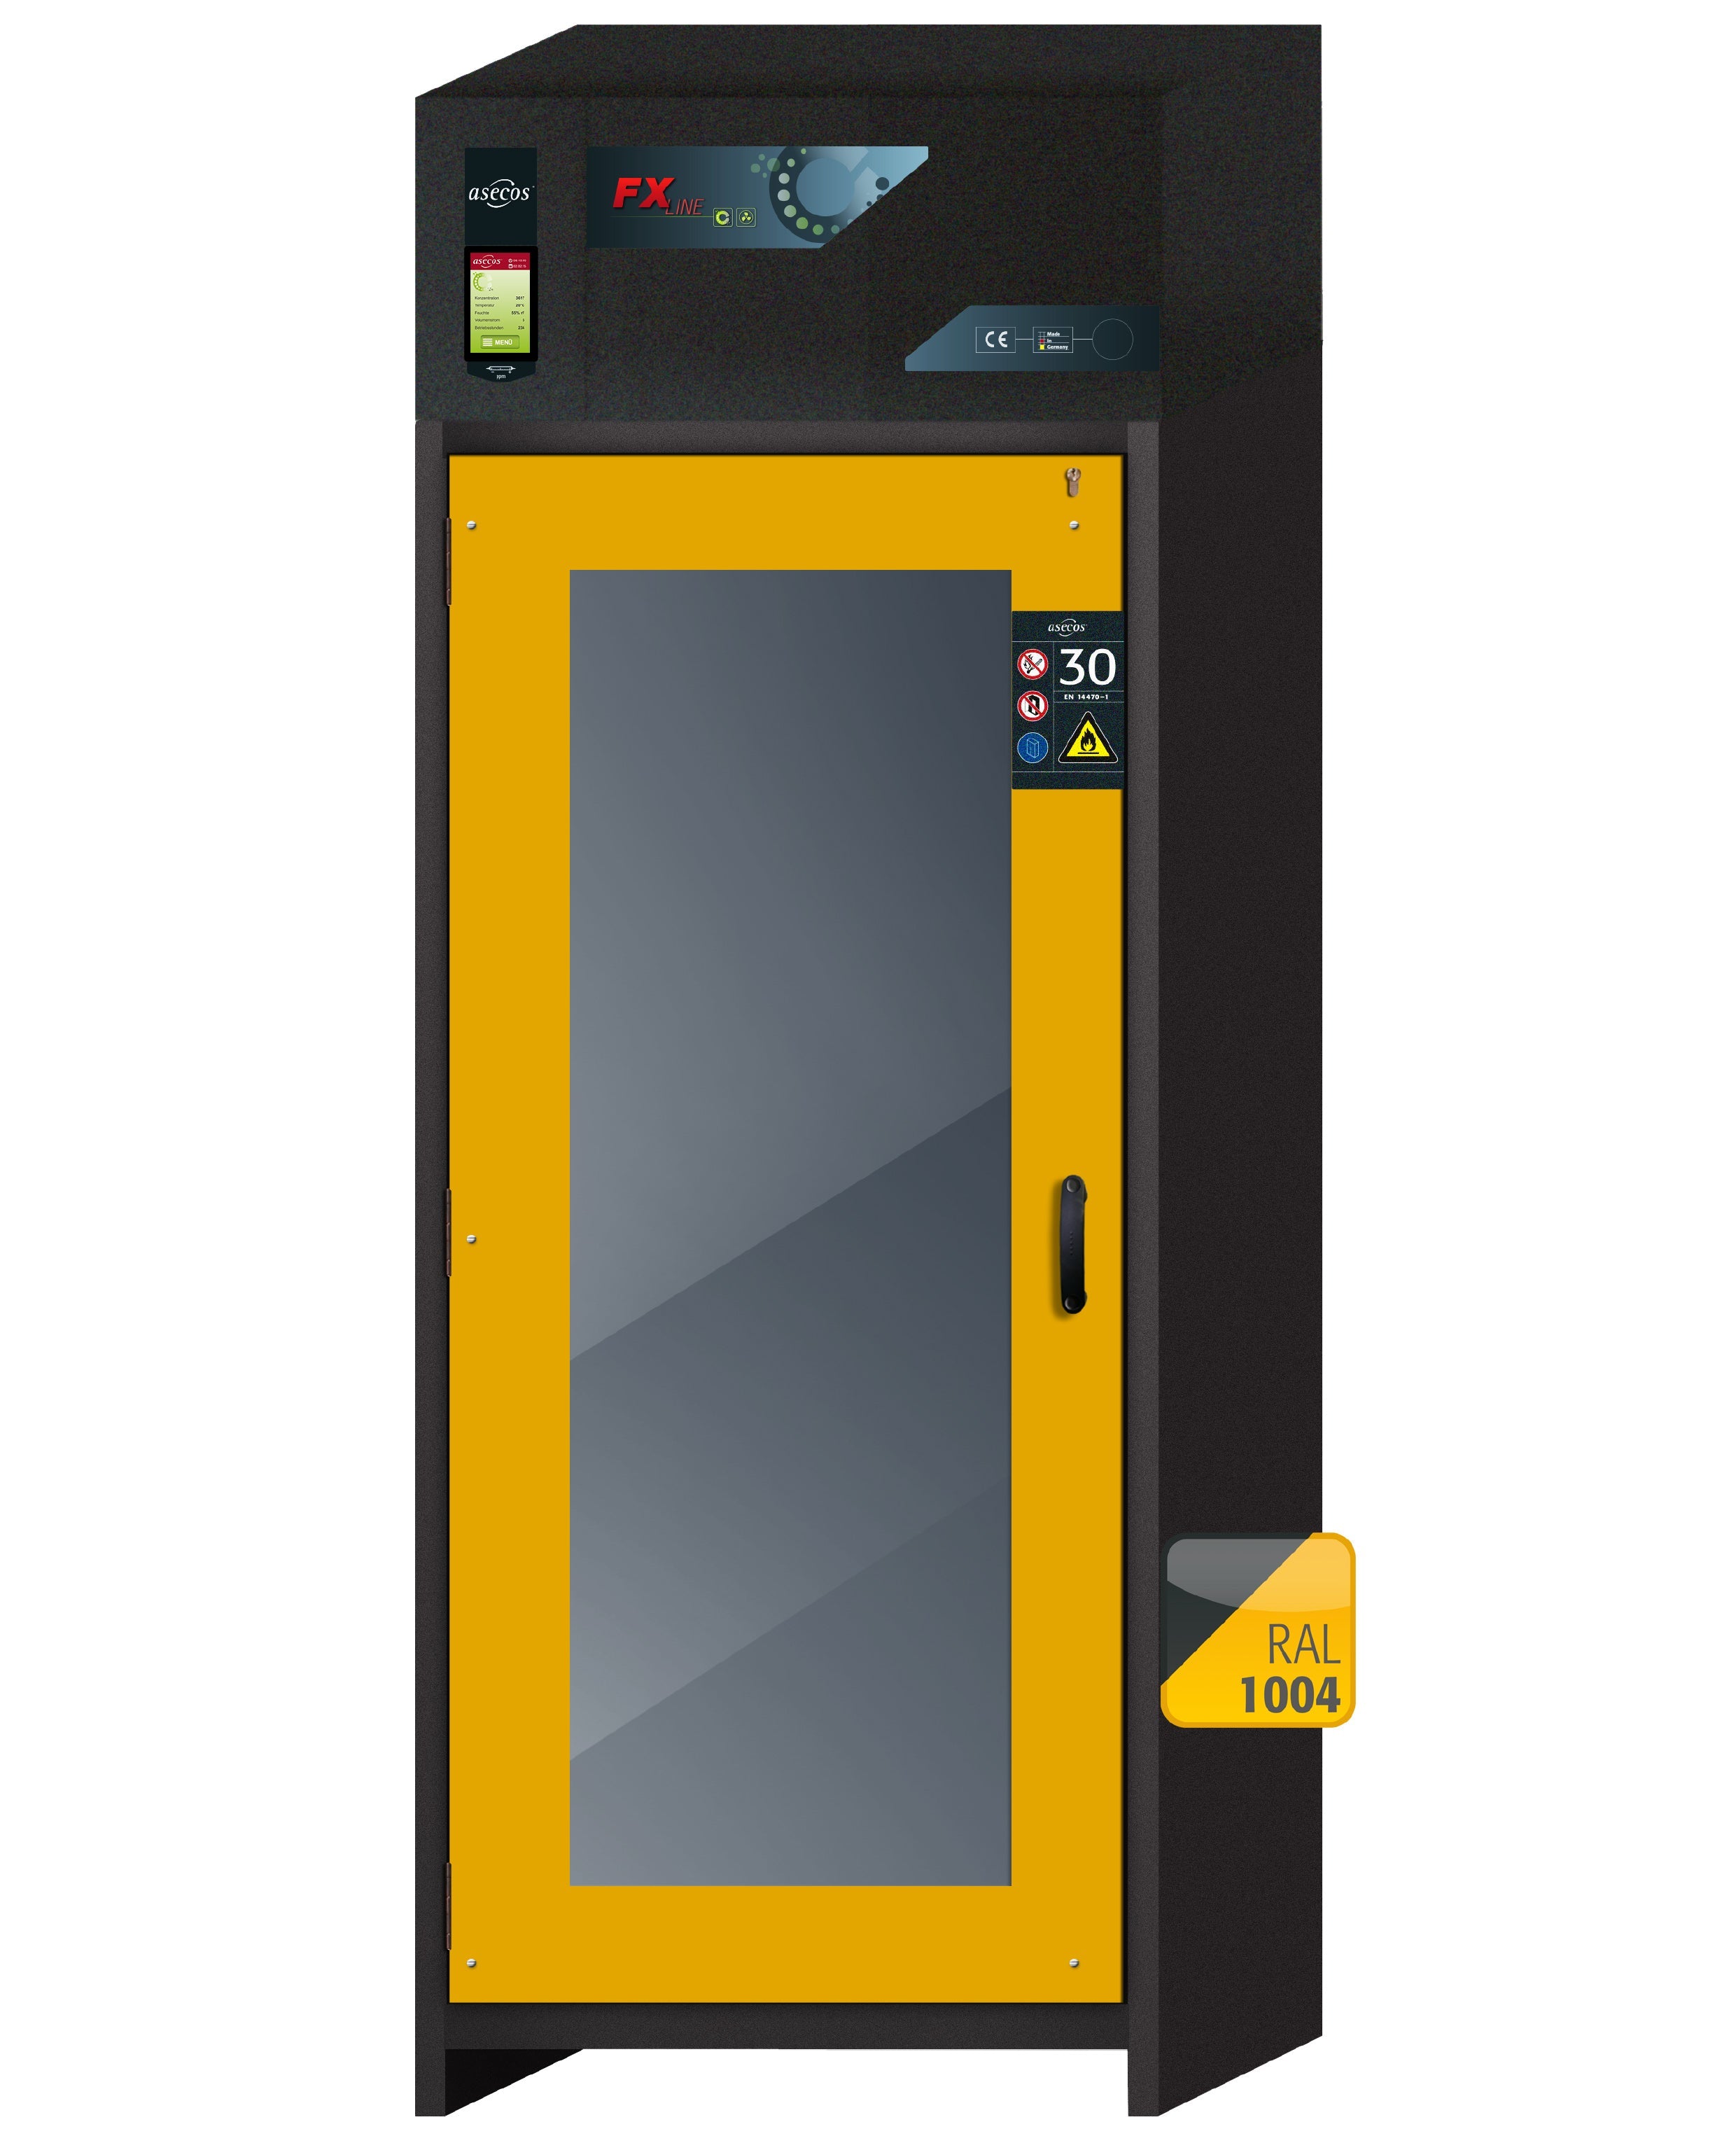 Type 30 circulating air filter cabinet FX-DISPLAY-30 model FX30.229.086.WDFW in safety yellow RAL 1004 with 6x standard pull-out tray (stainless steel 1.4301)